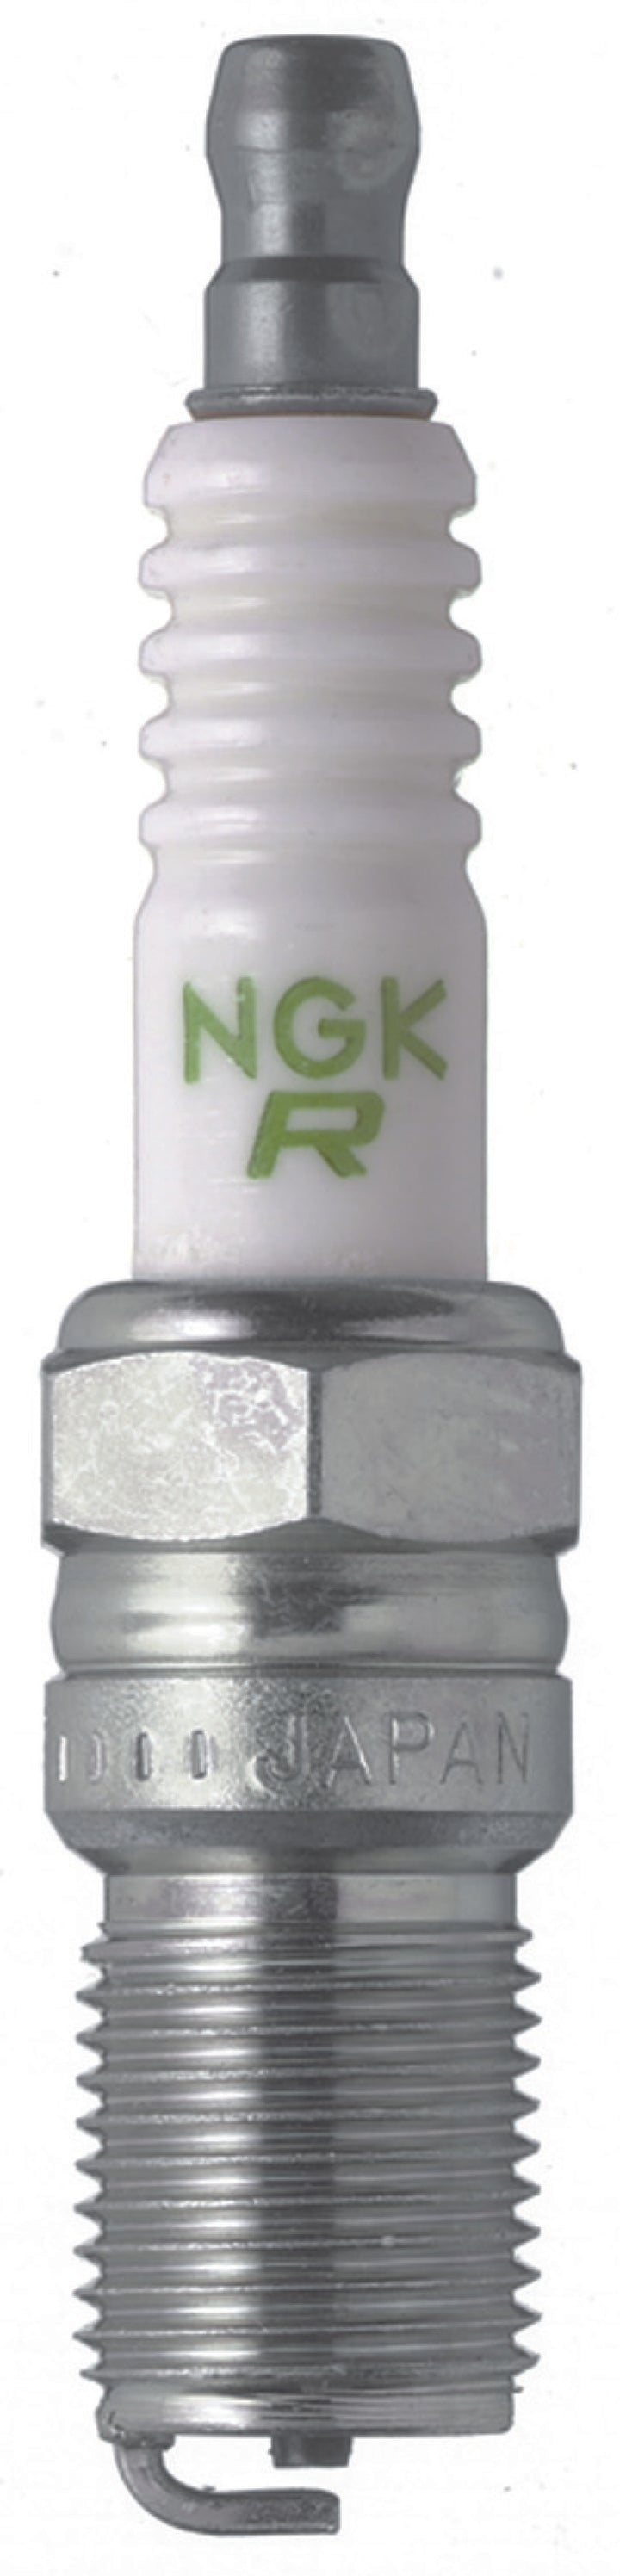 NGK Traditional Spark Plugs Box of 10 (BR7EFS).